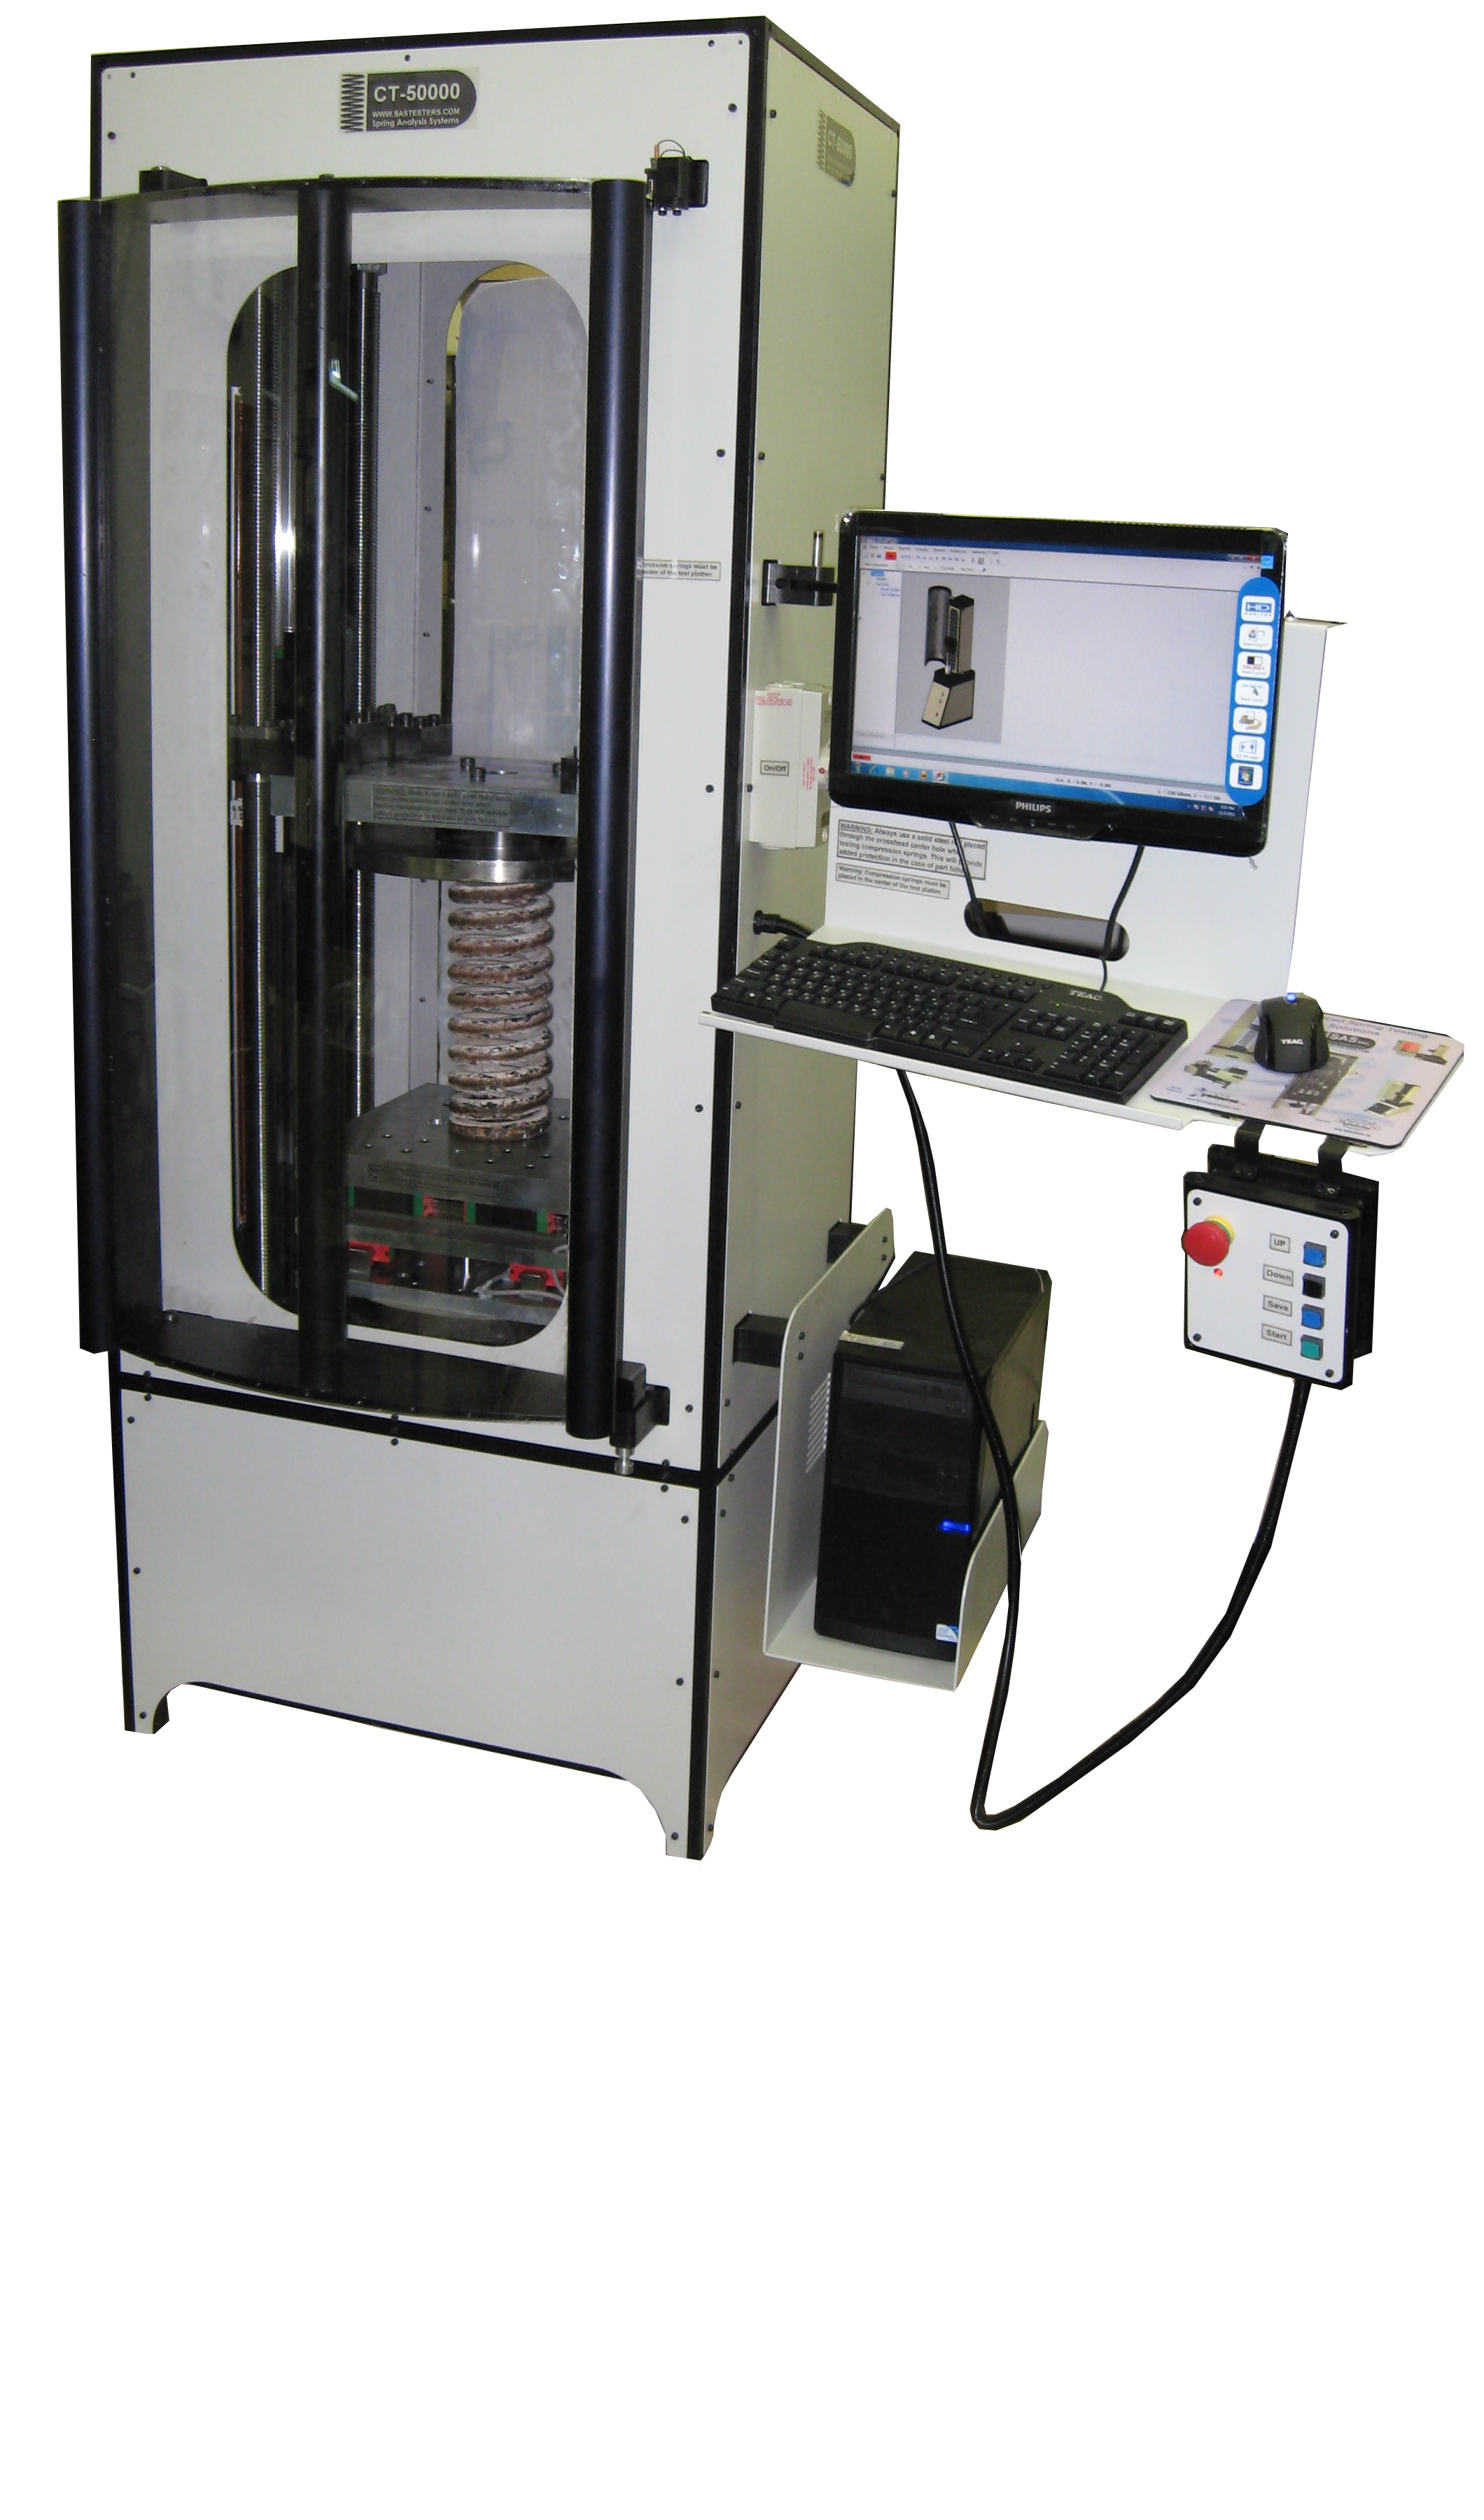 CT20000 20kN capacity, dual ballscrew automated spring tester